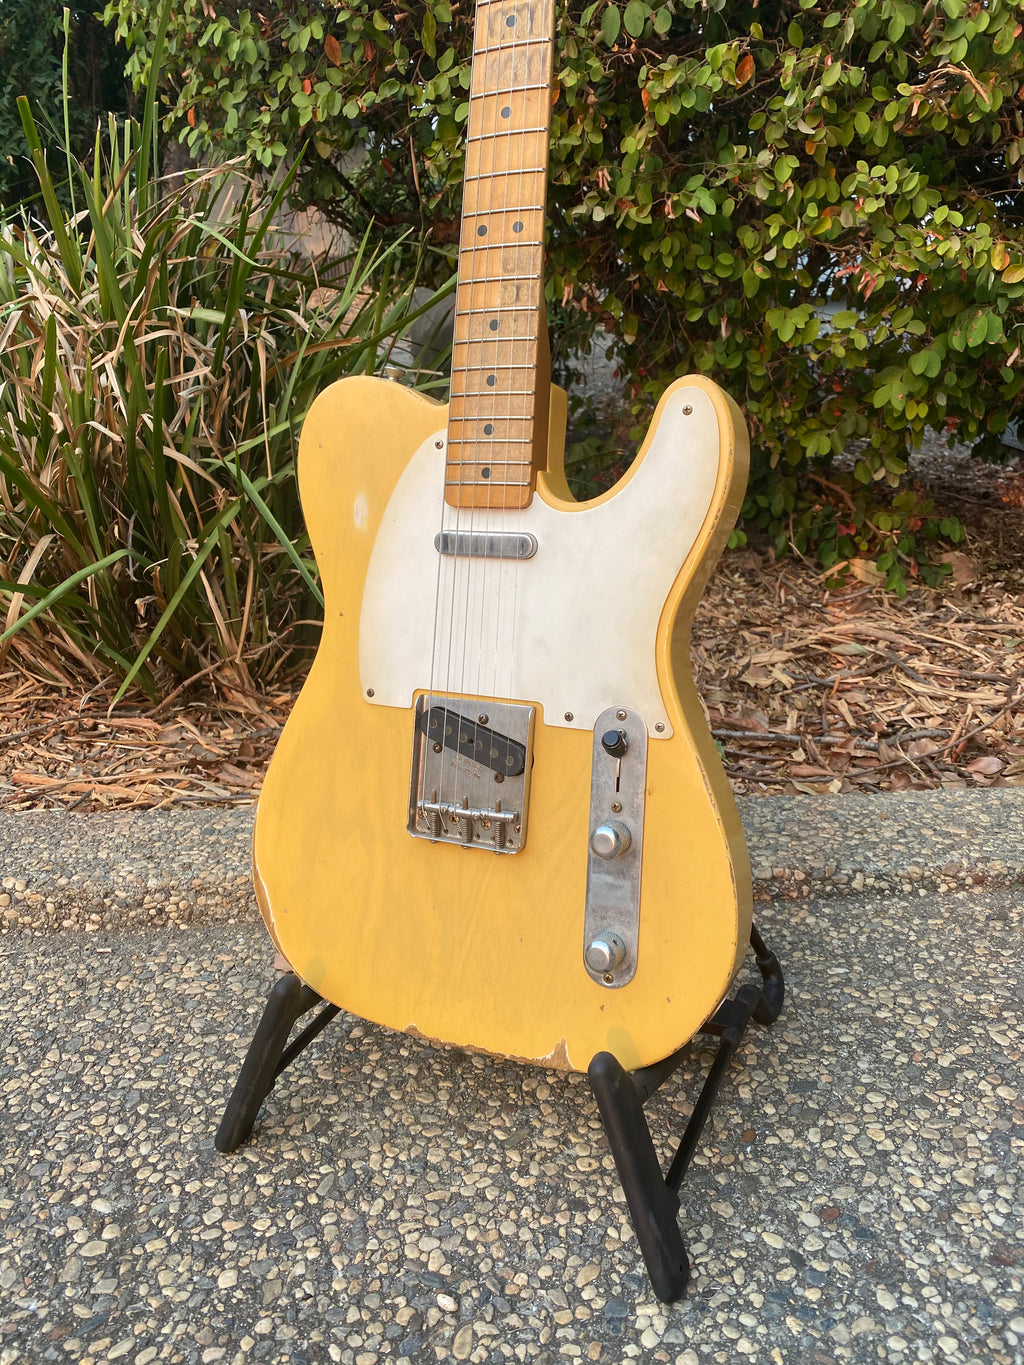 SOLD - Fender Telecaster Road Worn Relic 2008 First Year of